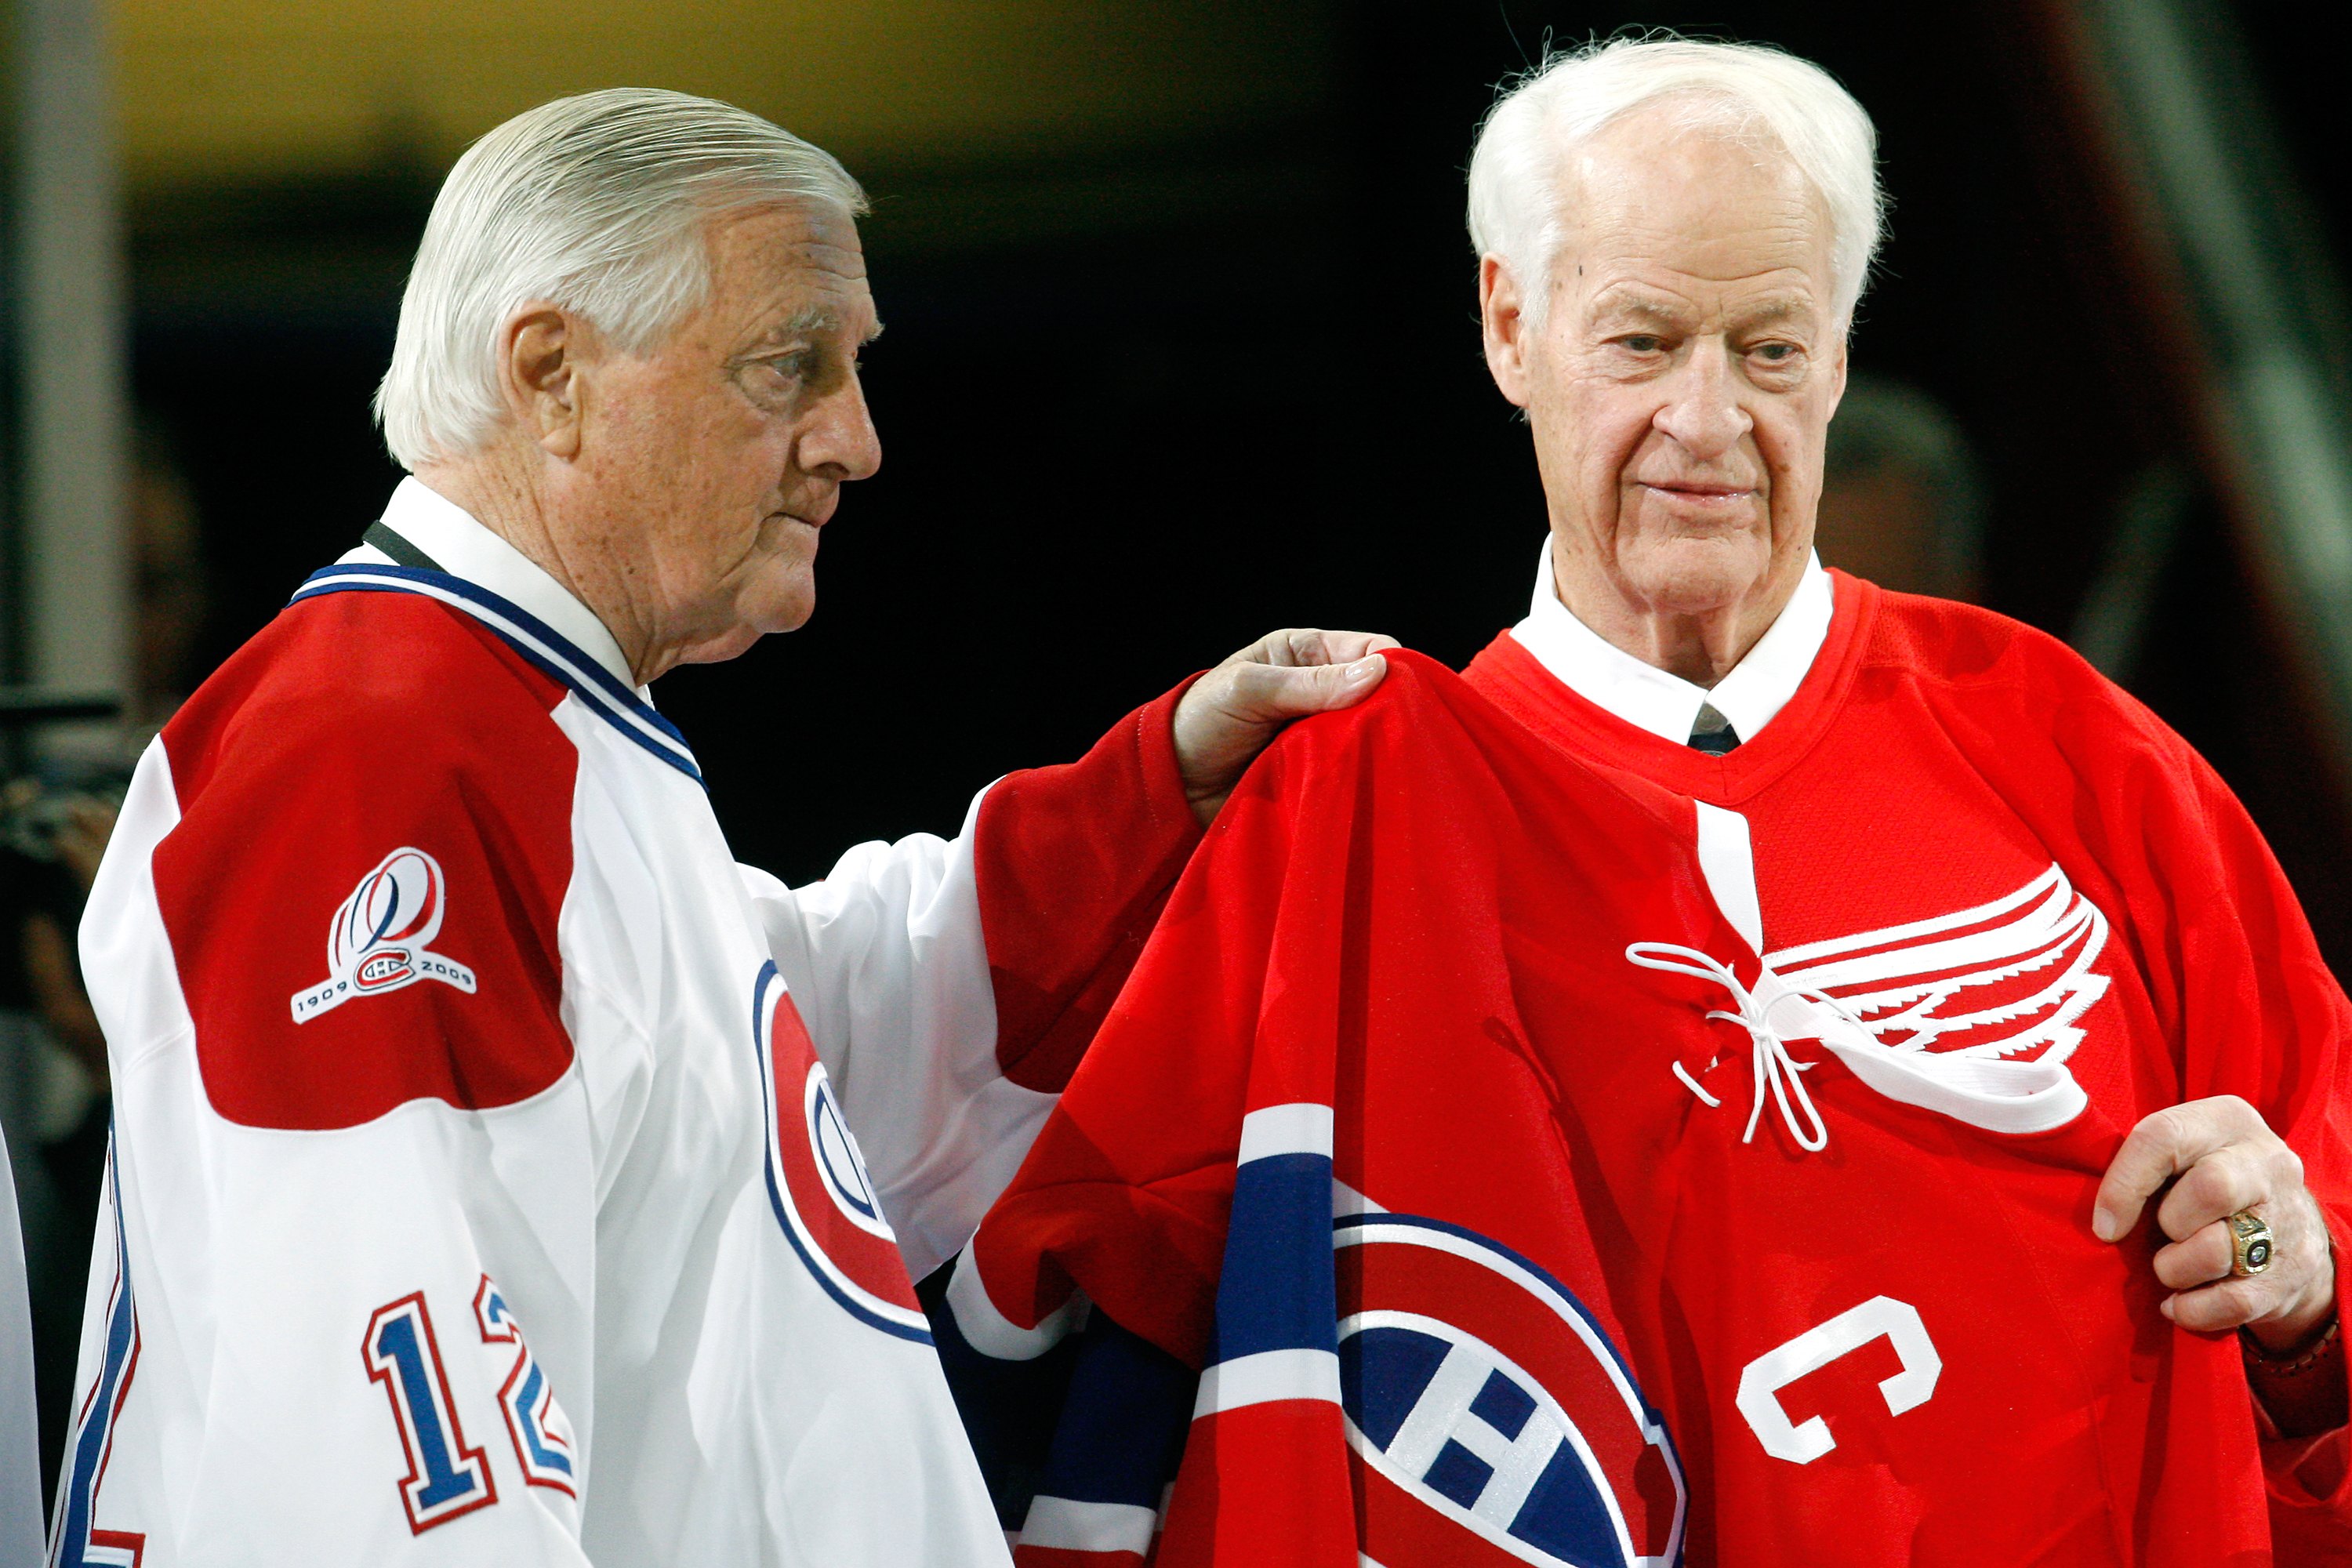 MONTREAL- DECEMBER 4:  Former Montreal Canadien Dickie Moore and Gordie Howe hold up a Maurice Richard Canadiens jersey during the Centennial Celebration ceremonies prior to the NHL game between the Montreal Canadiens and Boston Bruins on December 4, 2009